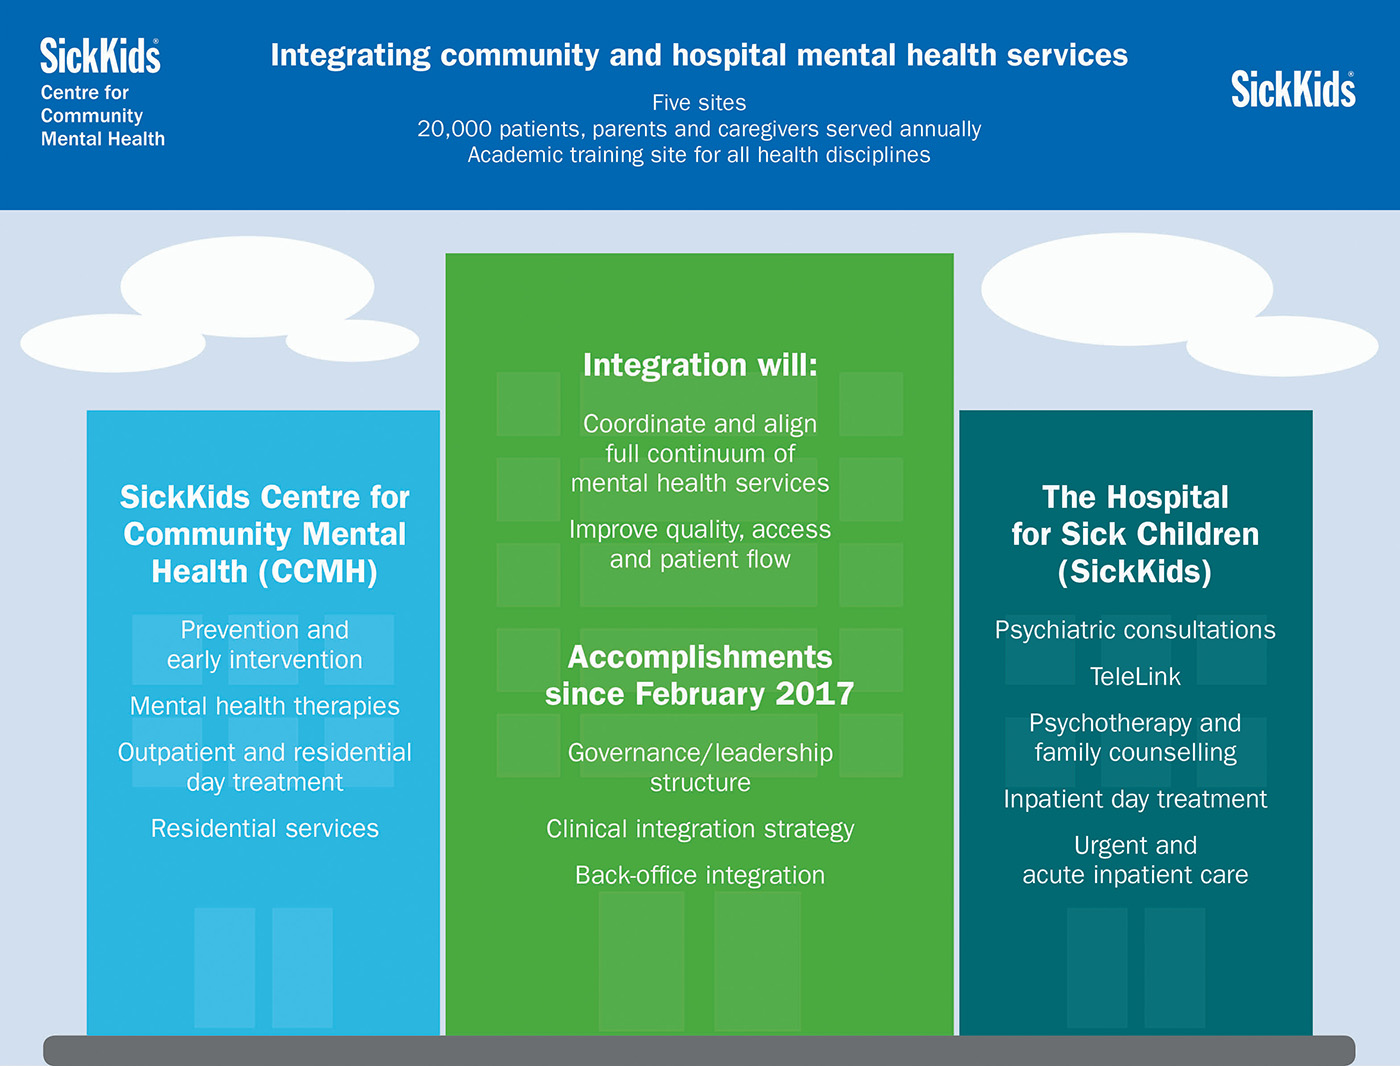 Graphic of SickKids CCMH and SickKids Hospital - 2017 model of integration of community and hospital mental health services